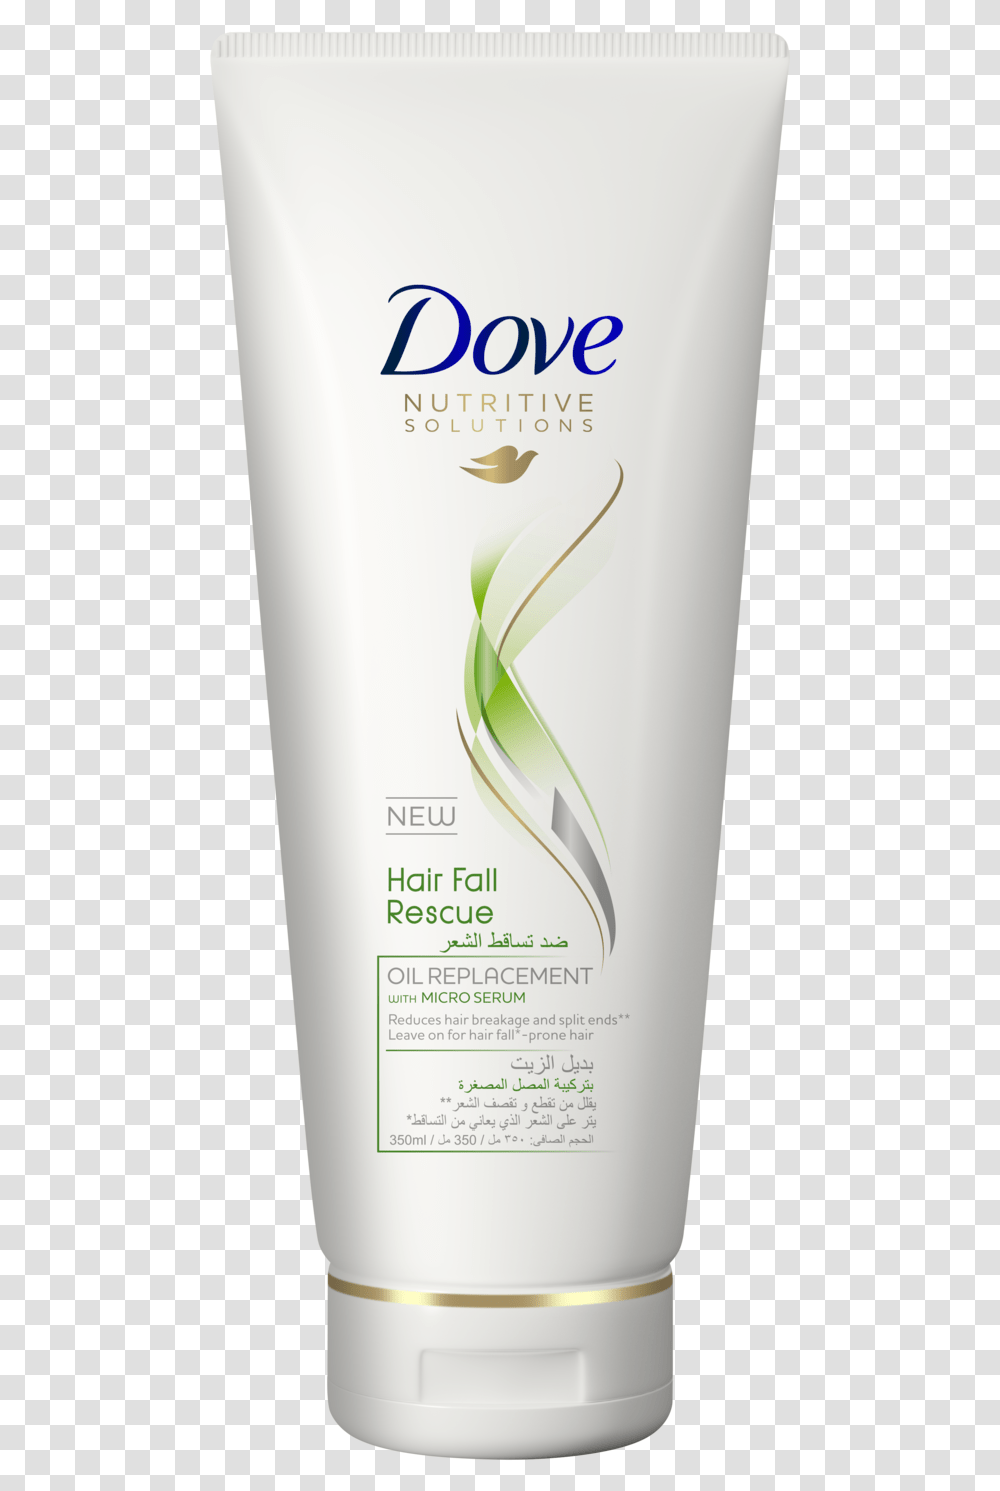 Dove Hair Fall Rescue Oil Replacement Hair Conditioner, Bottle, Shampoo, Lotion Transparent Png